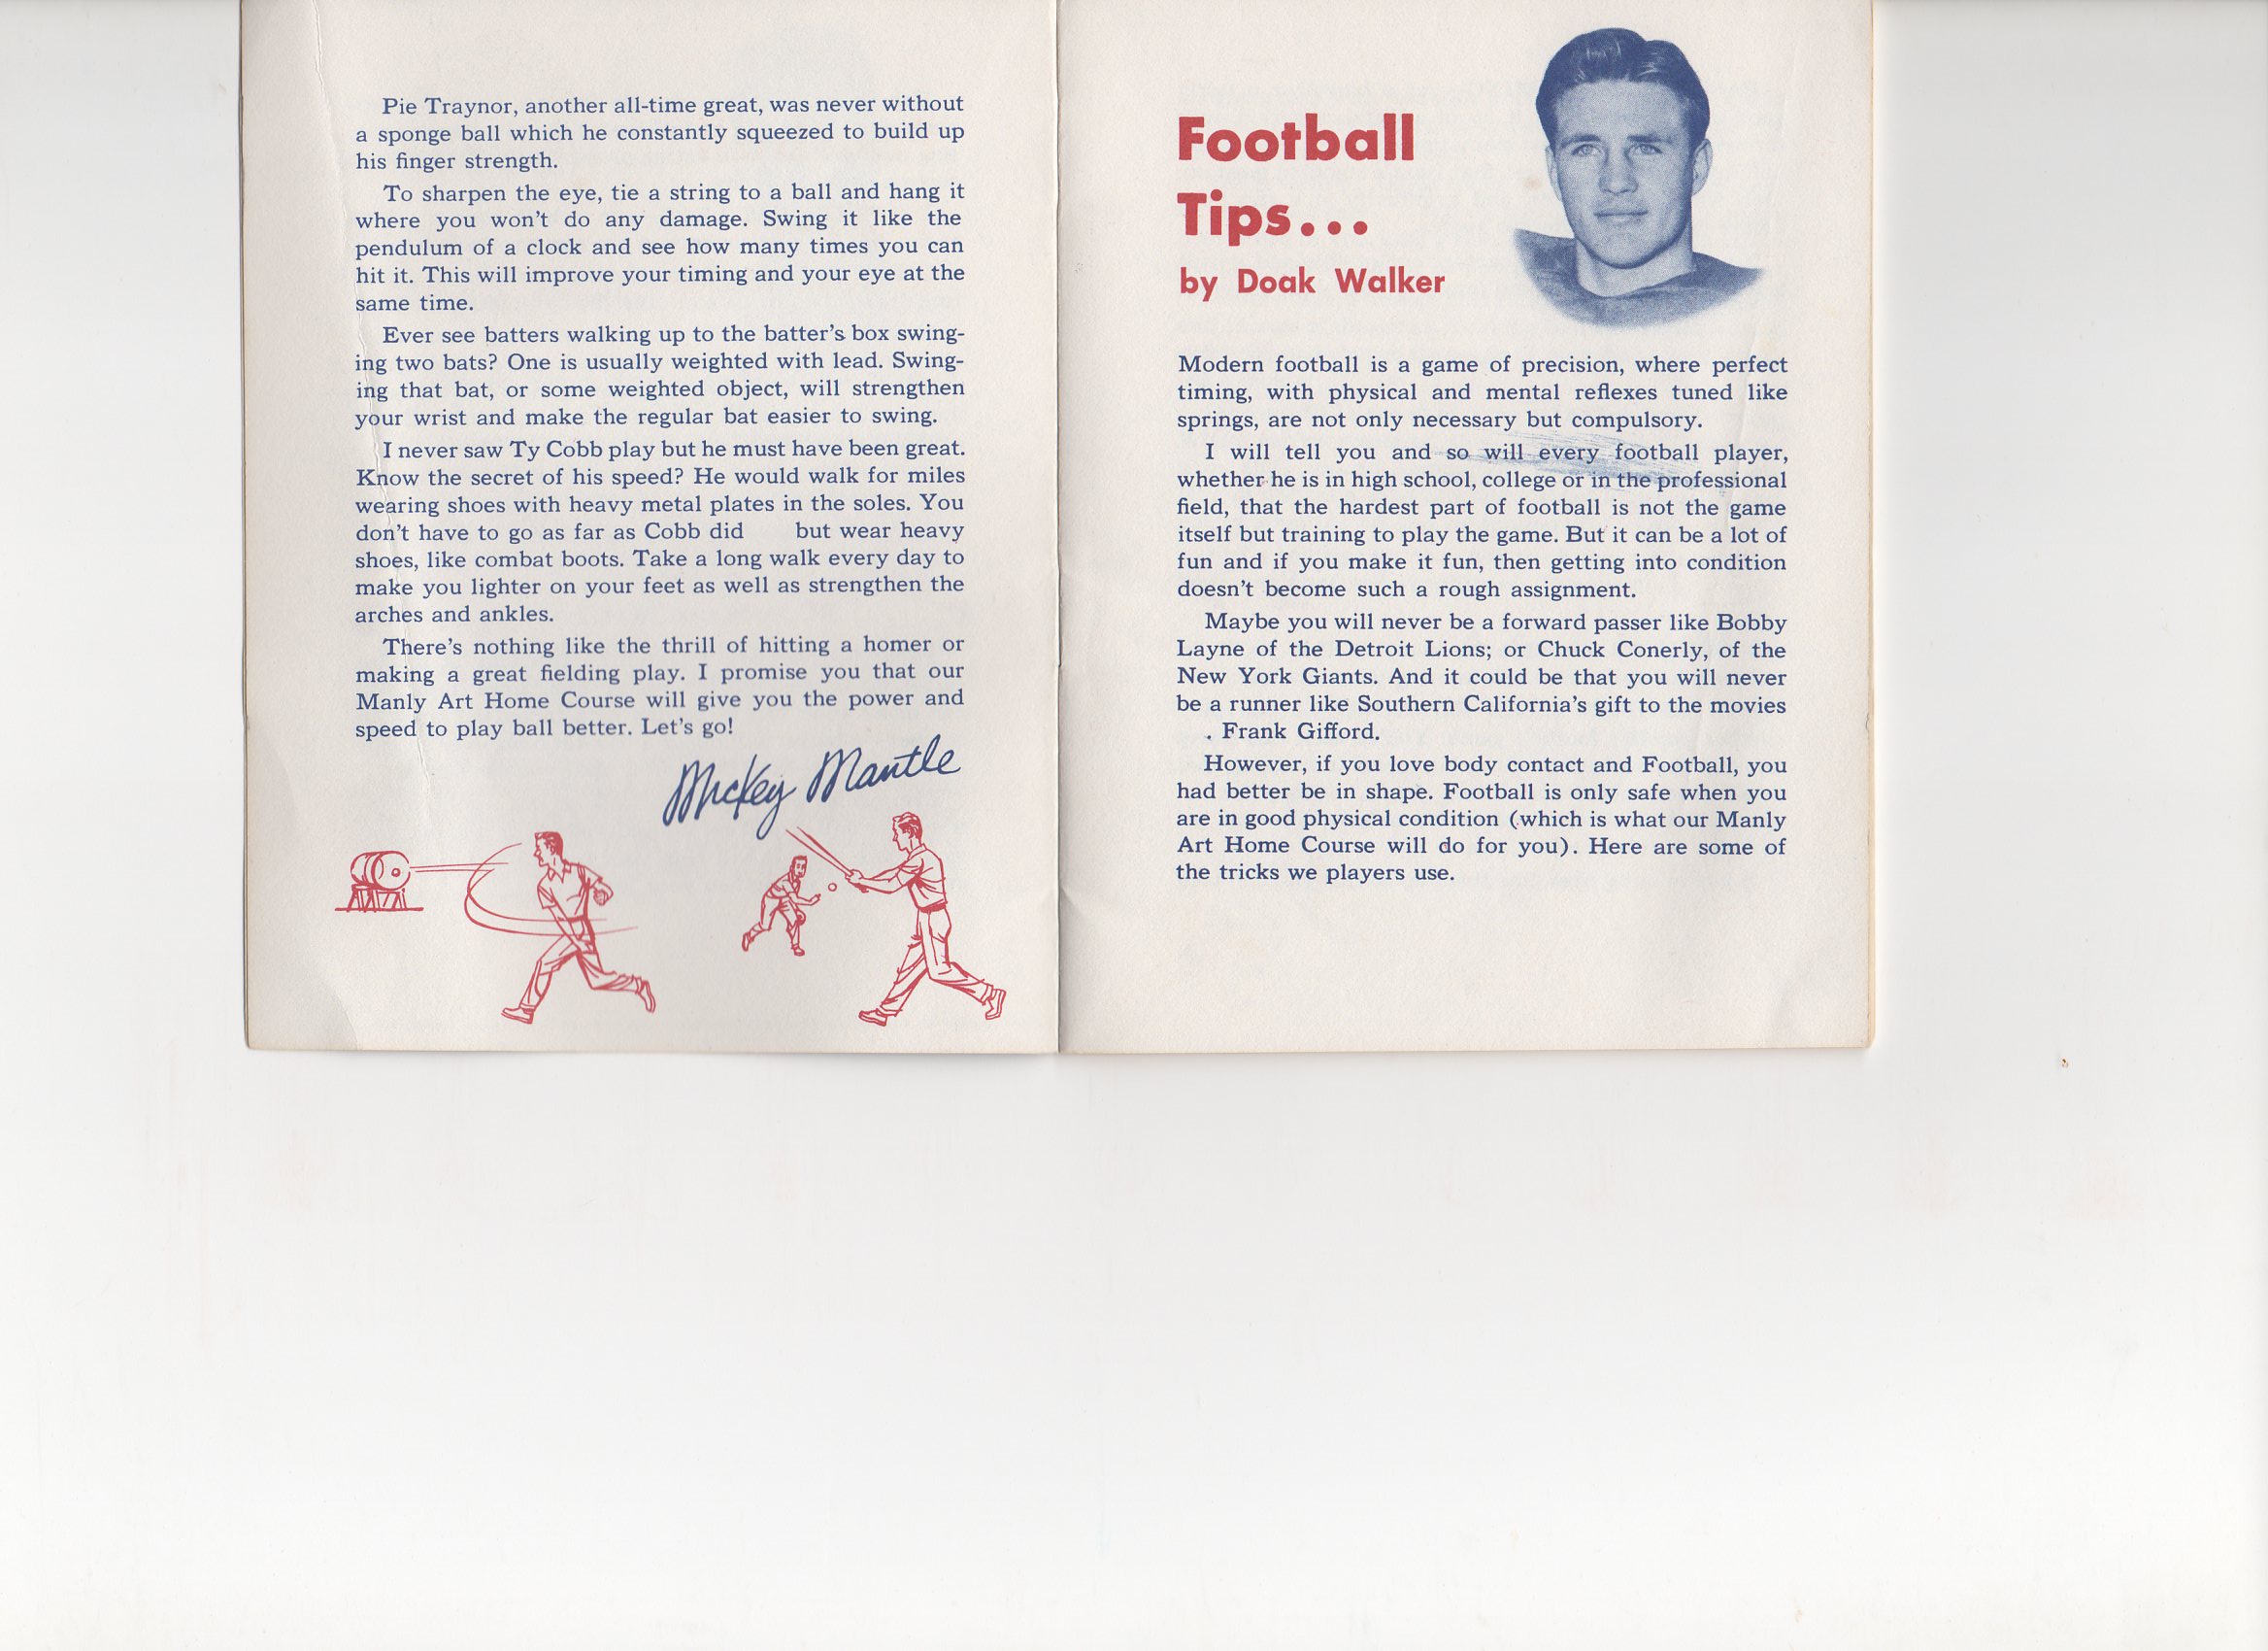 1957 national sports council, small pamphlet